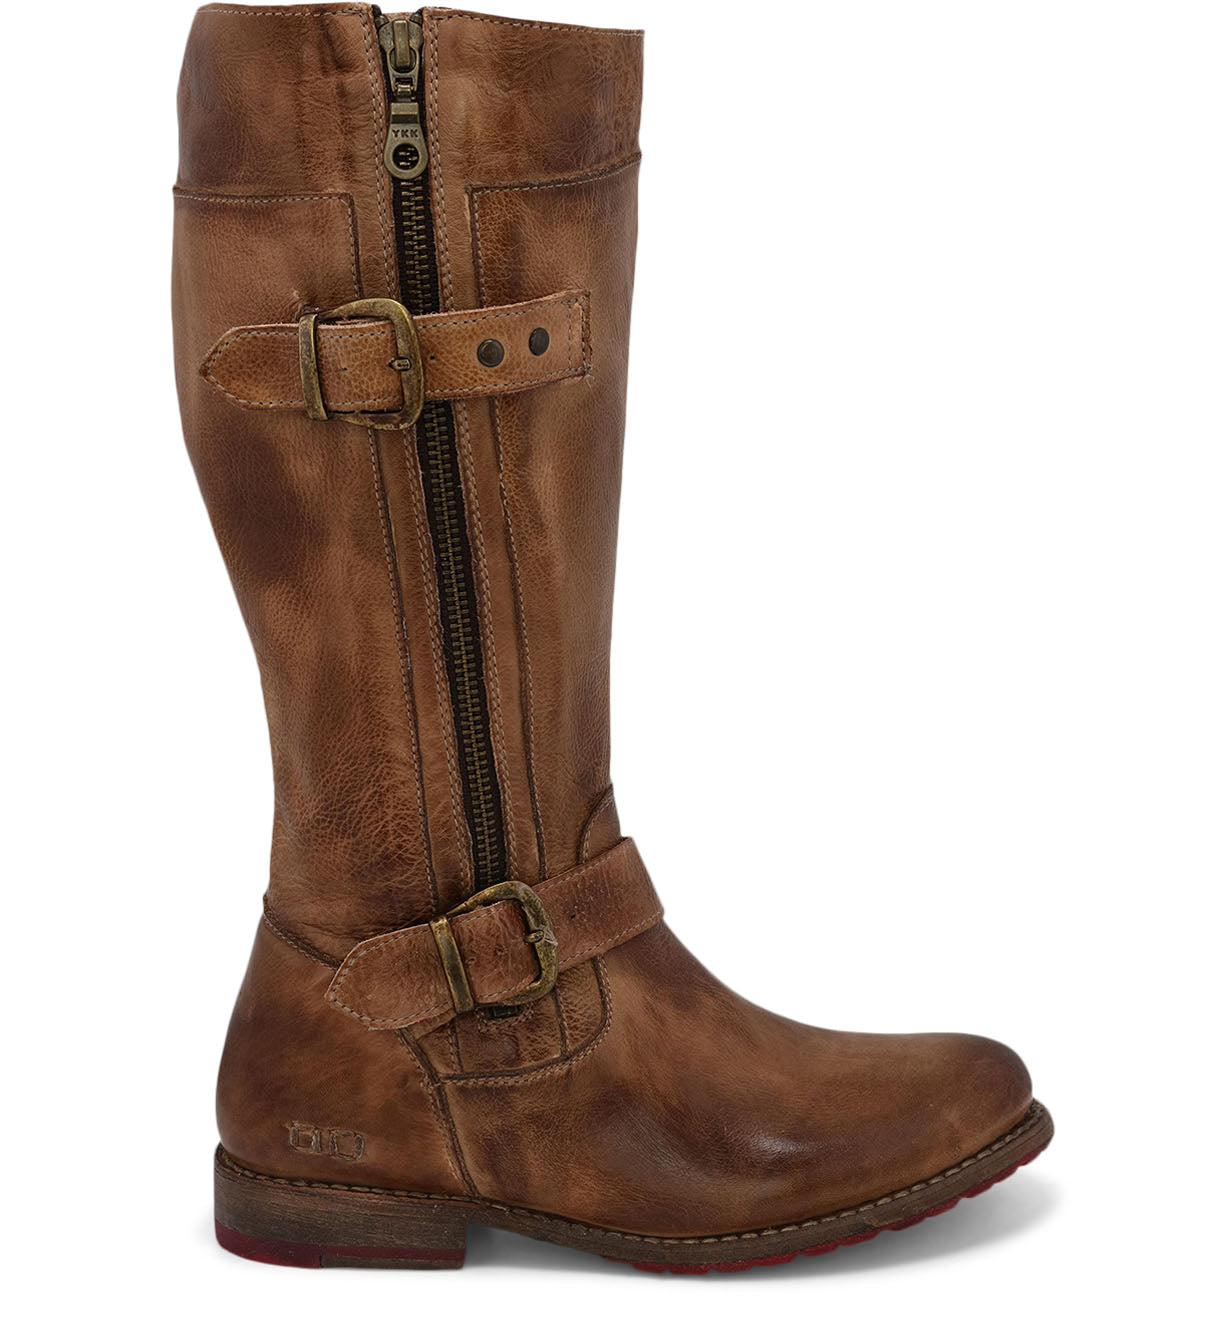 A women's Gogo Lug Wide Calf brown leather boot with buckles and zippers, made by Bed Stu.